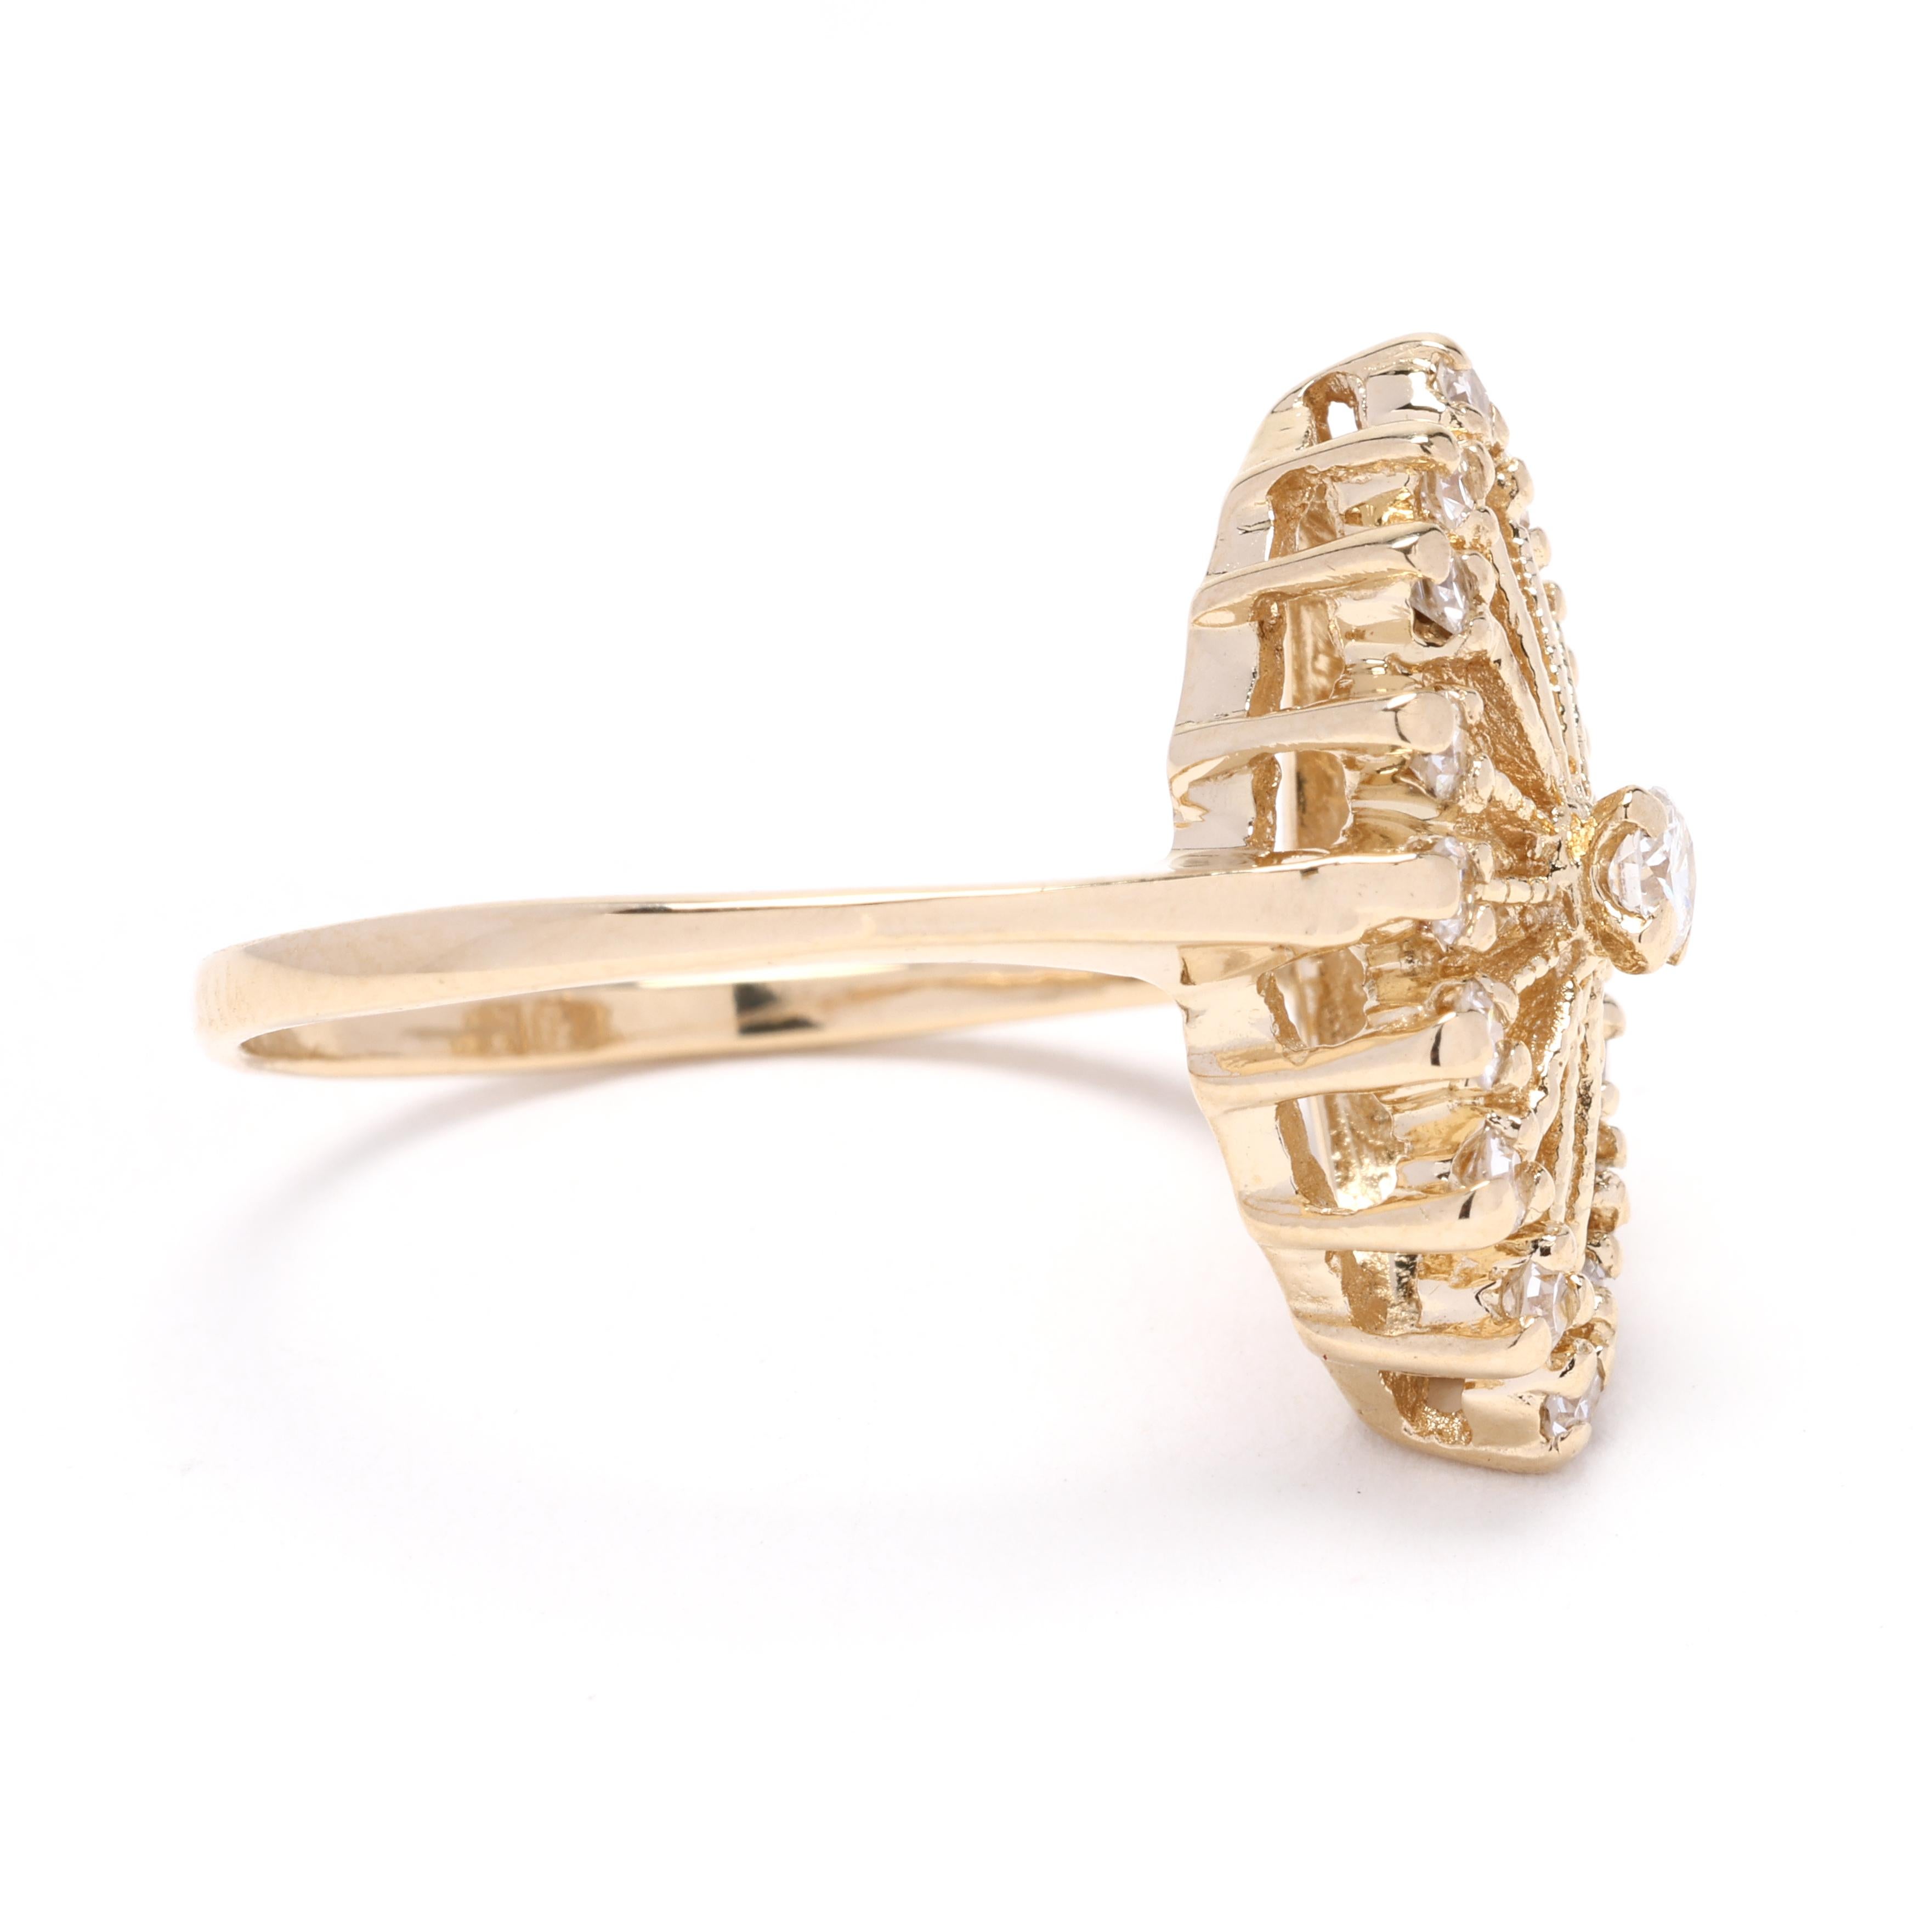 This elegant 0.33ctw diamond navette ring is a stunning addition to any jewelry collection. Made with 14k yellow gold, this ring features a unique navette design that is both classic and modern. The striking cluster of diamonds creates a dazzling